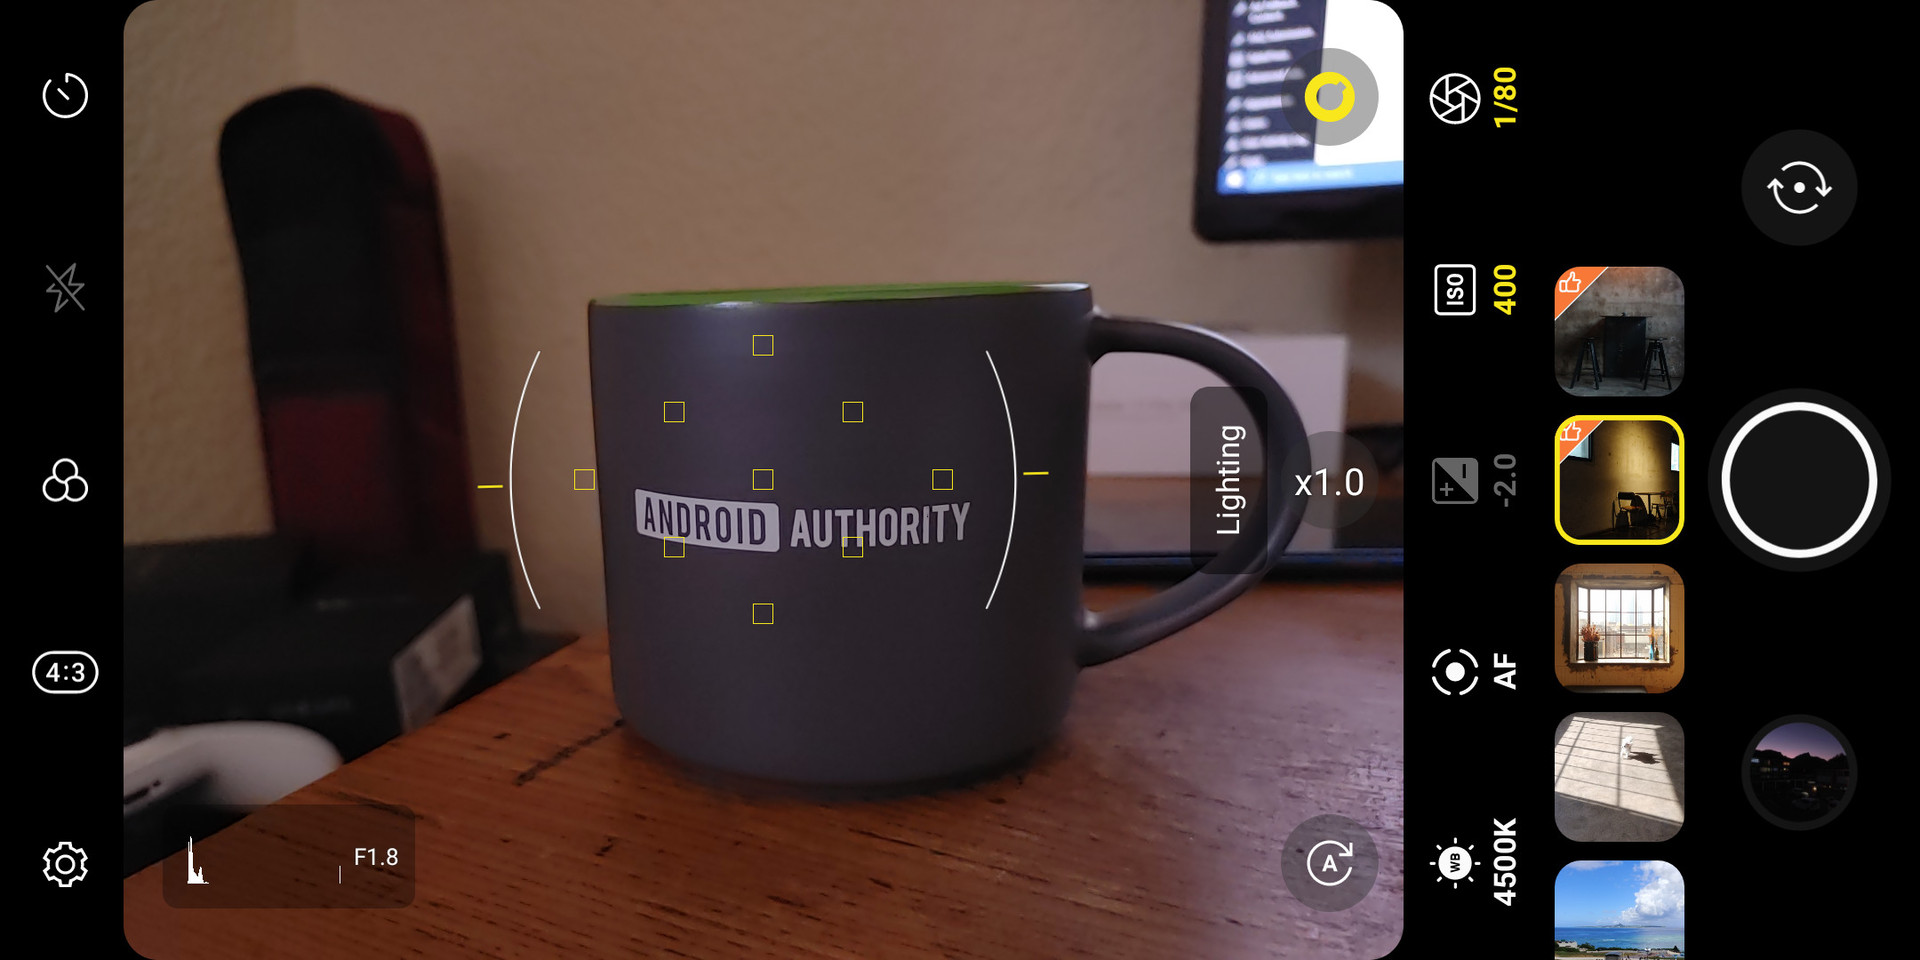 LG V60 manual mode graphy taking a picture of an Android Authority mug on a table.